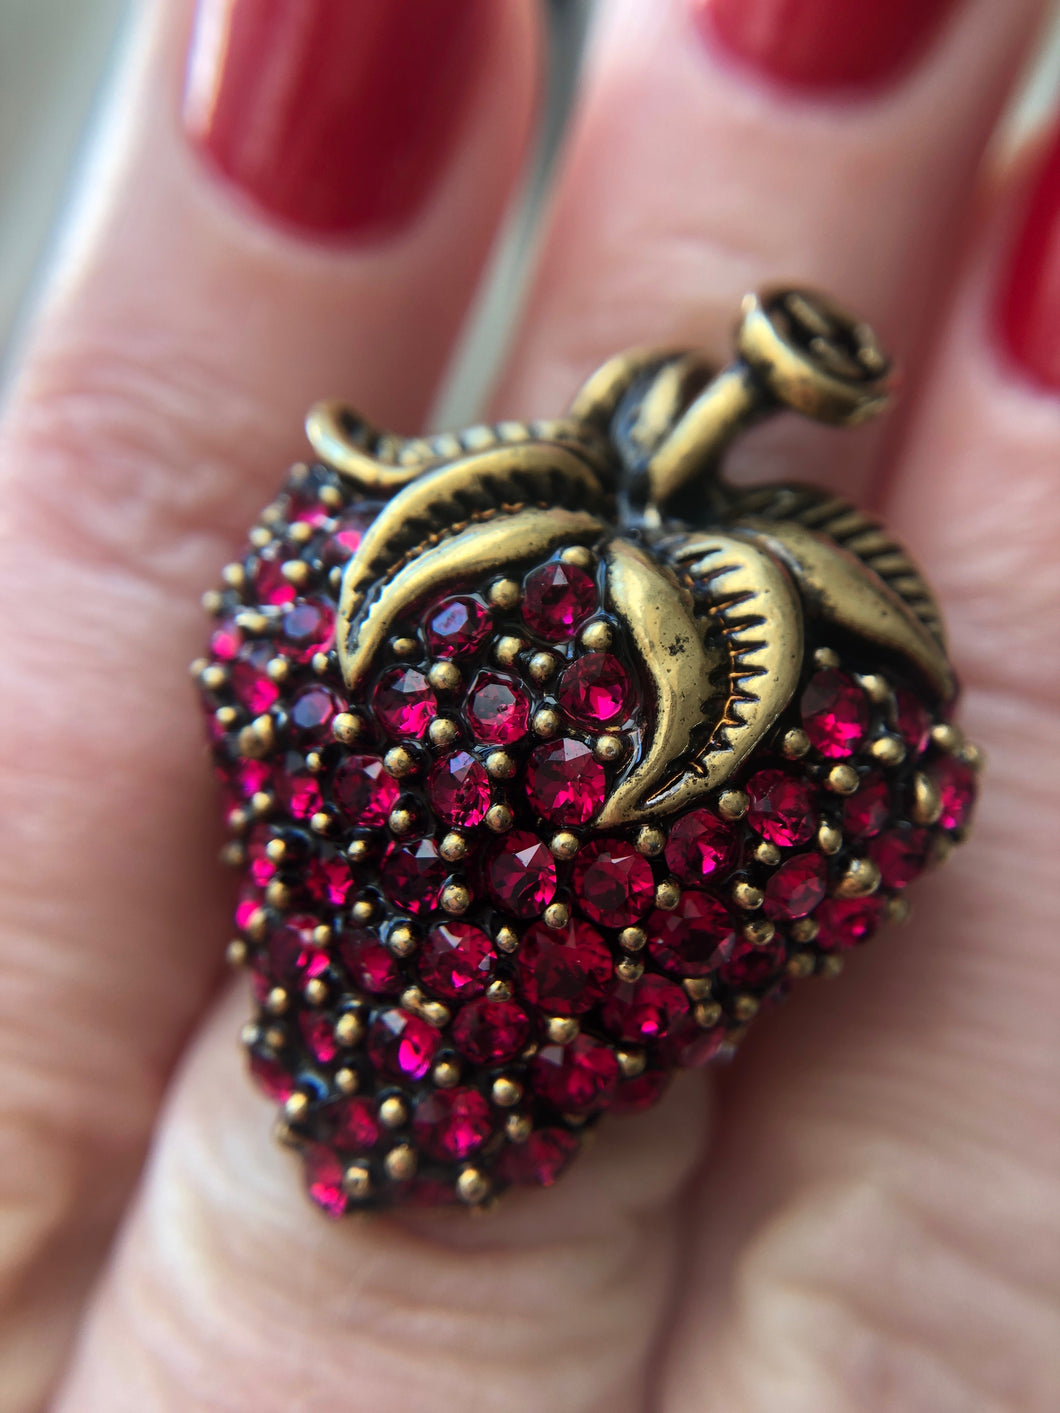 Gucci Strawberry Ring in Antique Gold with Red Crystals